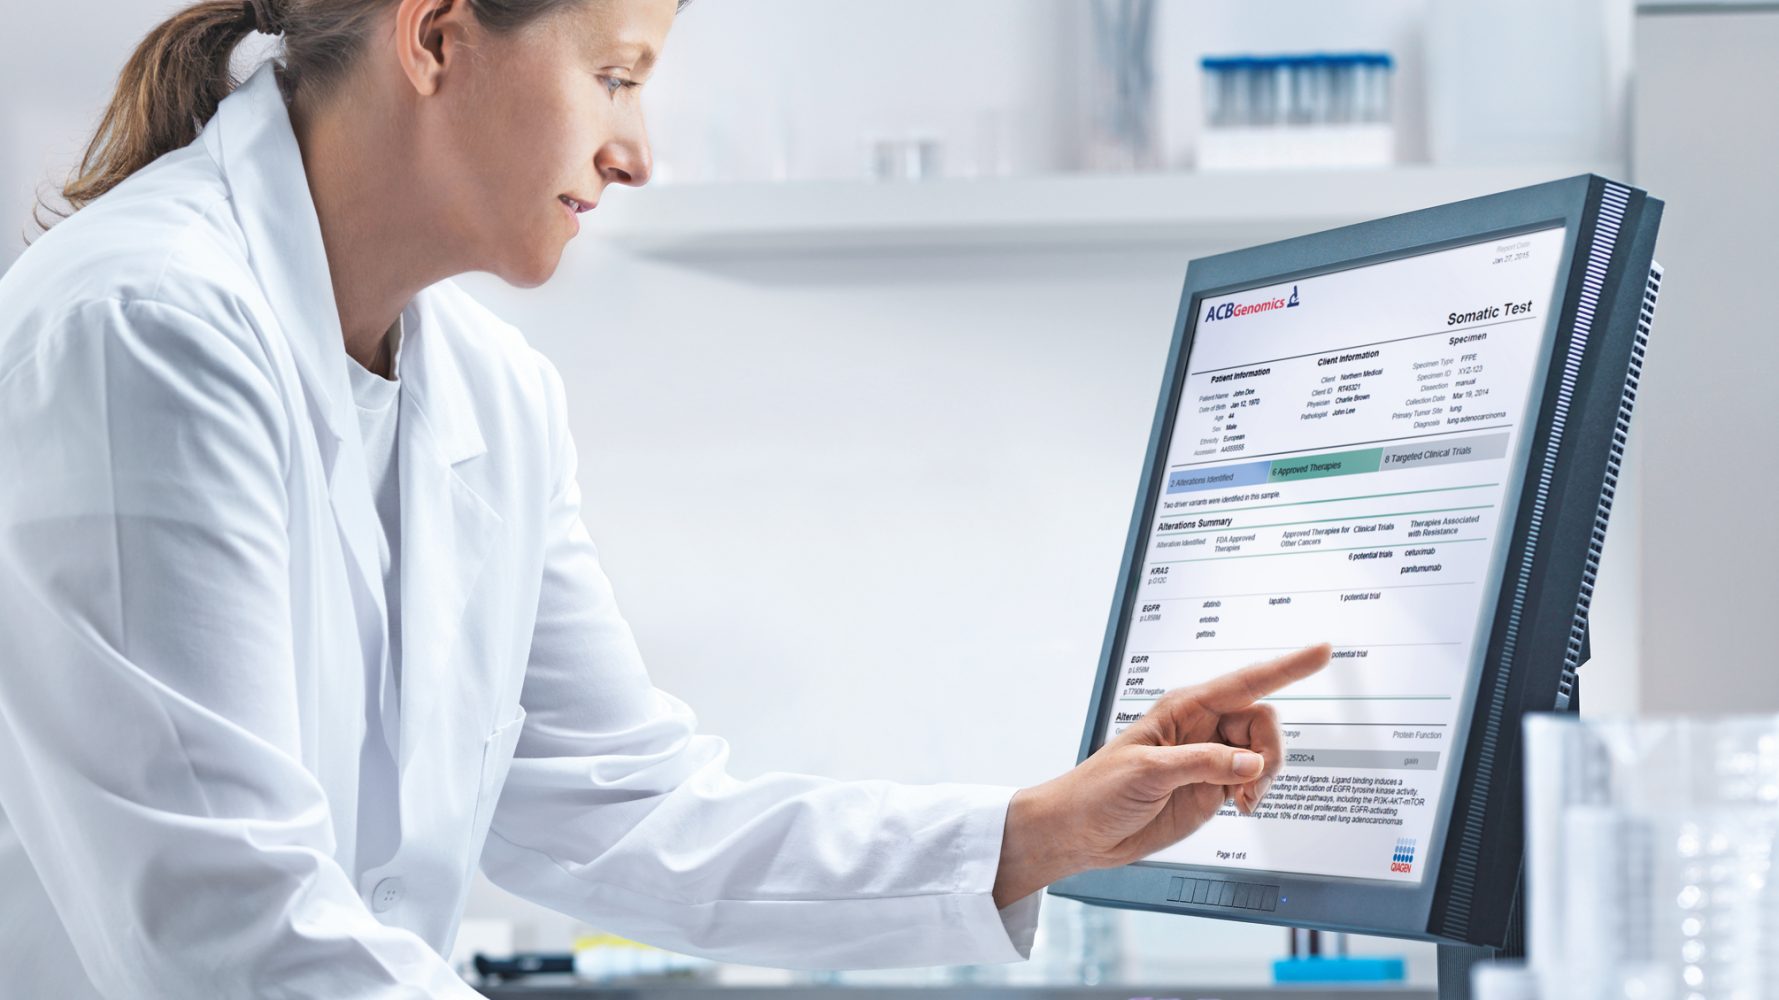 What makes the best clinical decision support tools so widely utilized?